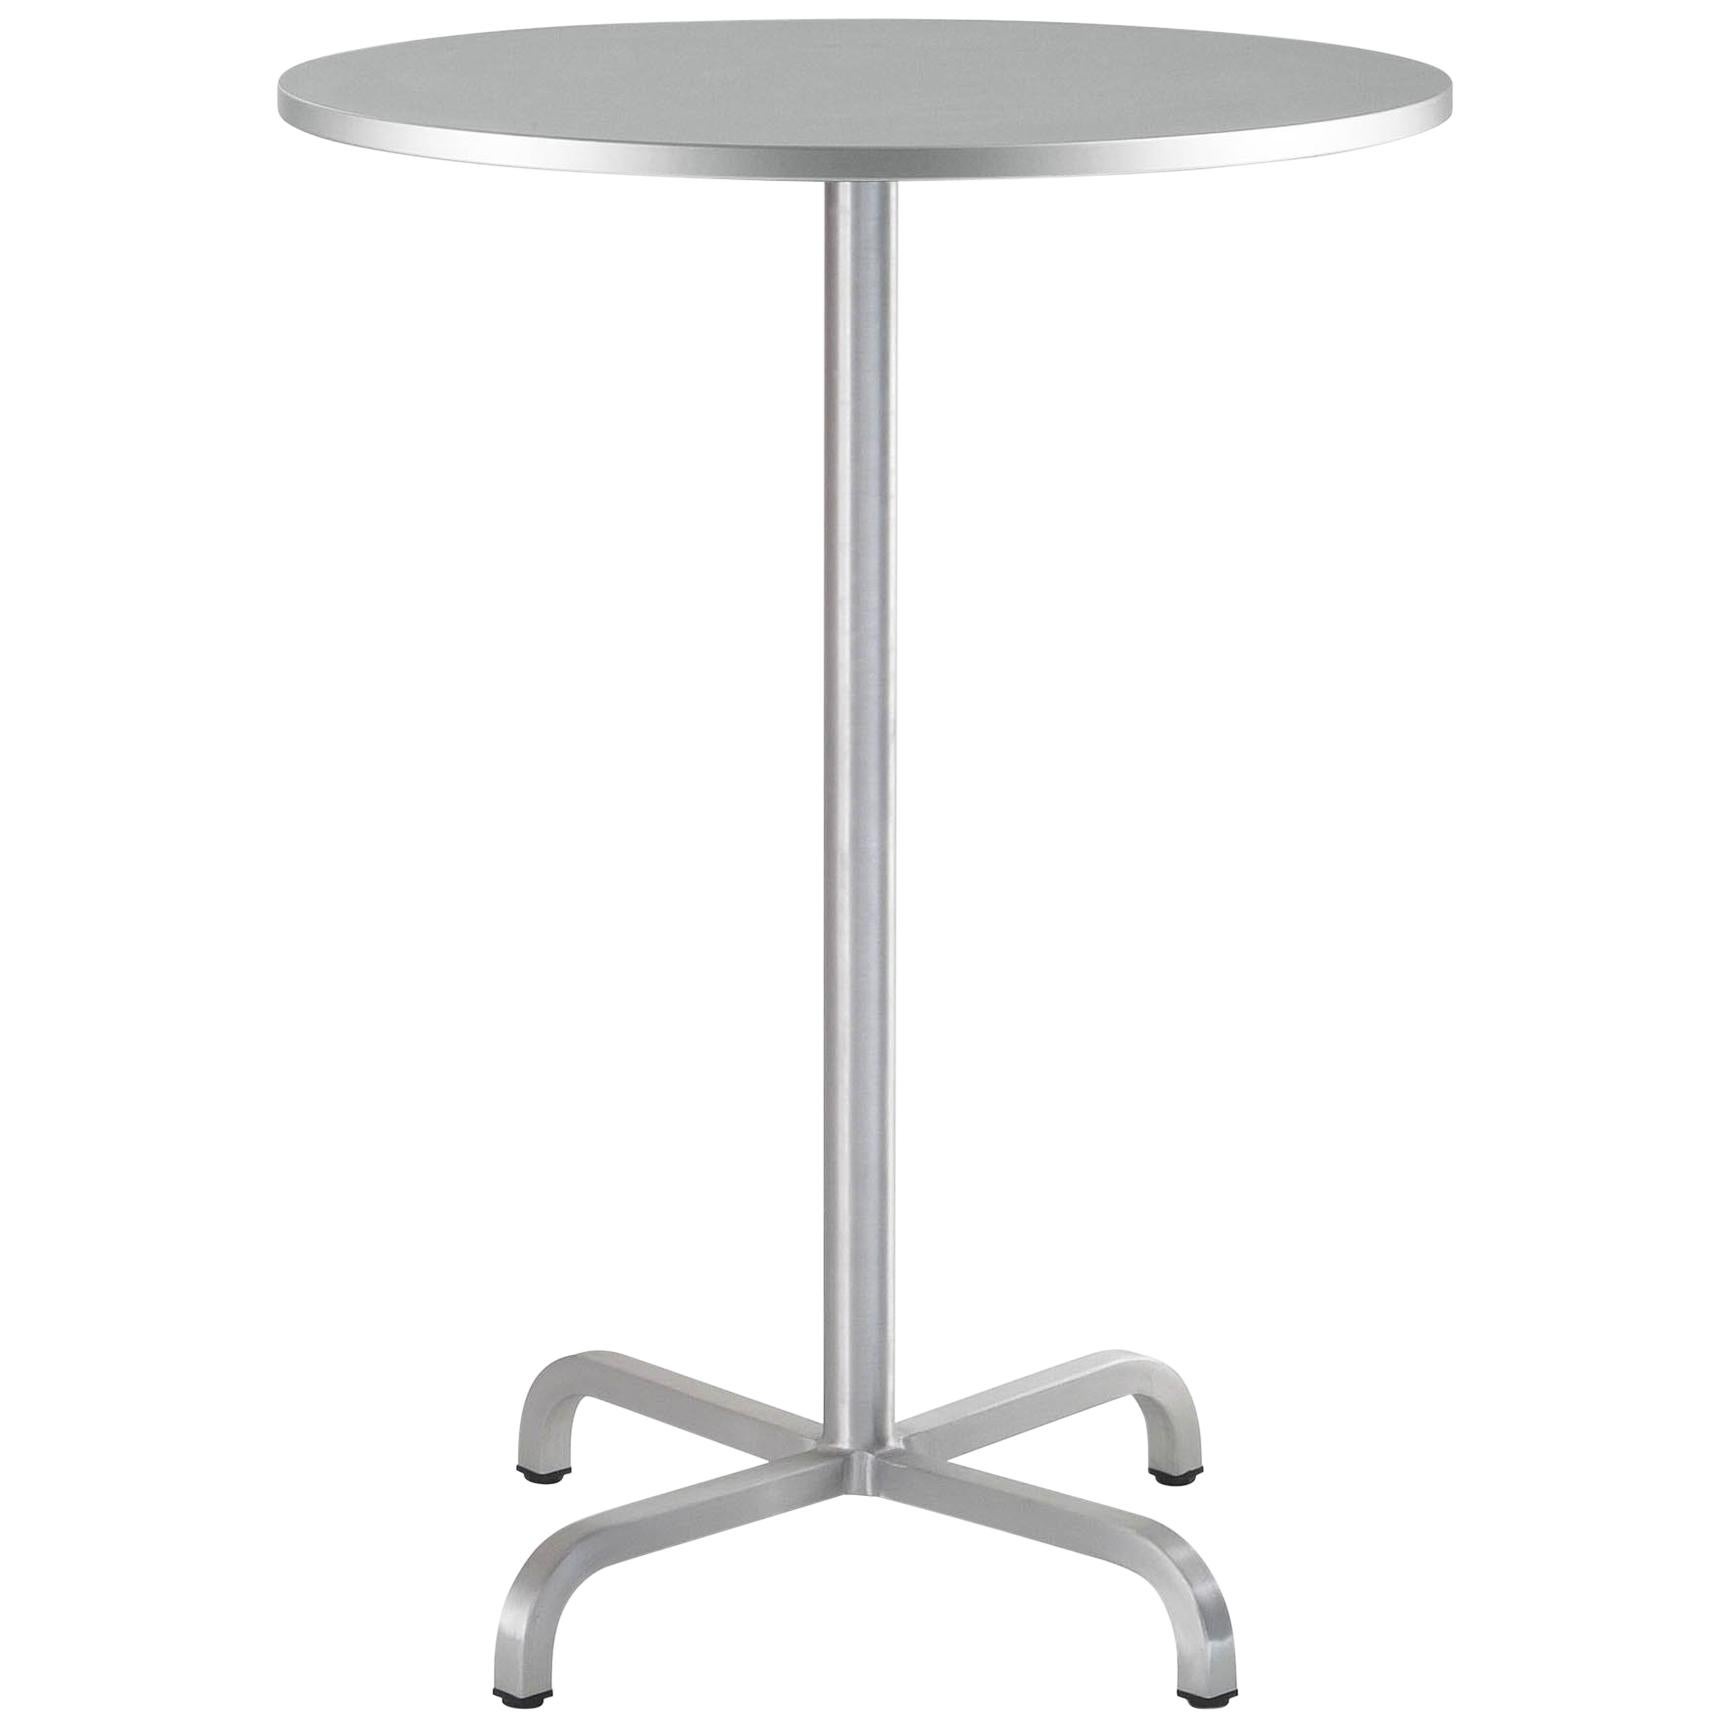 Emeco 20-06 Large Round Bar Table with Gray Laminate Top by Norman Foster